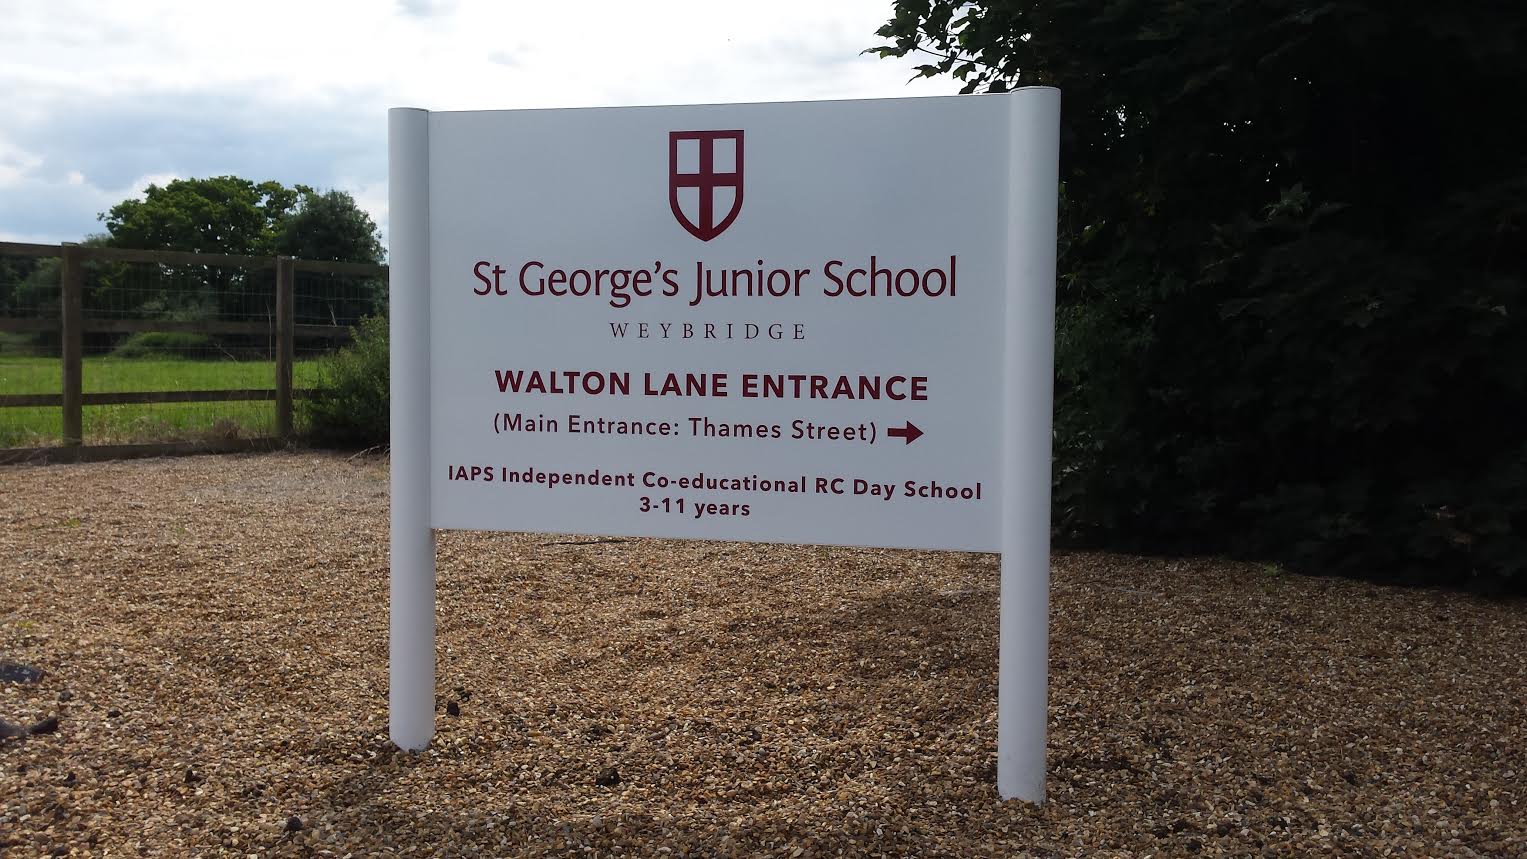 External sign at St George's Junior School